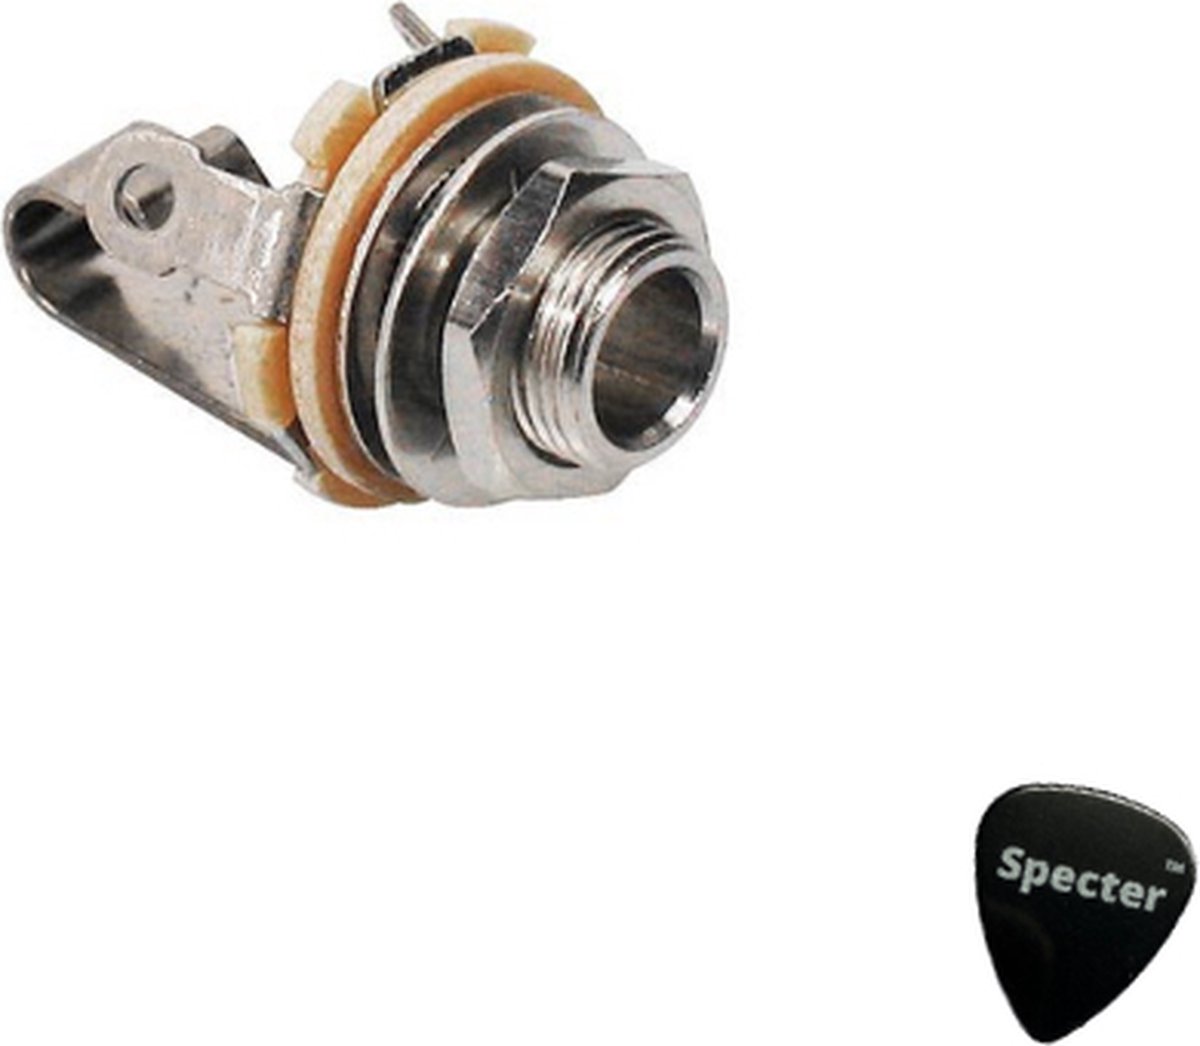 Switchcraft SC-11 Chassis Connector Output Jack 2-Polig 6.3mm - Met Specter Plectrum